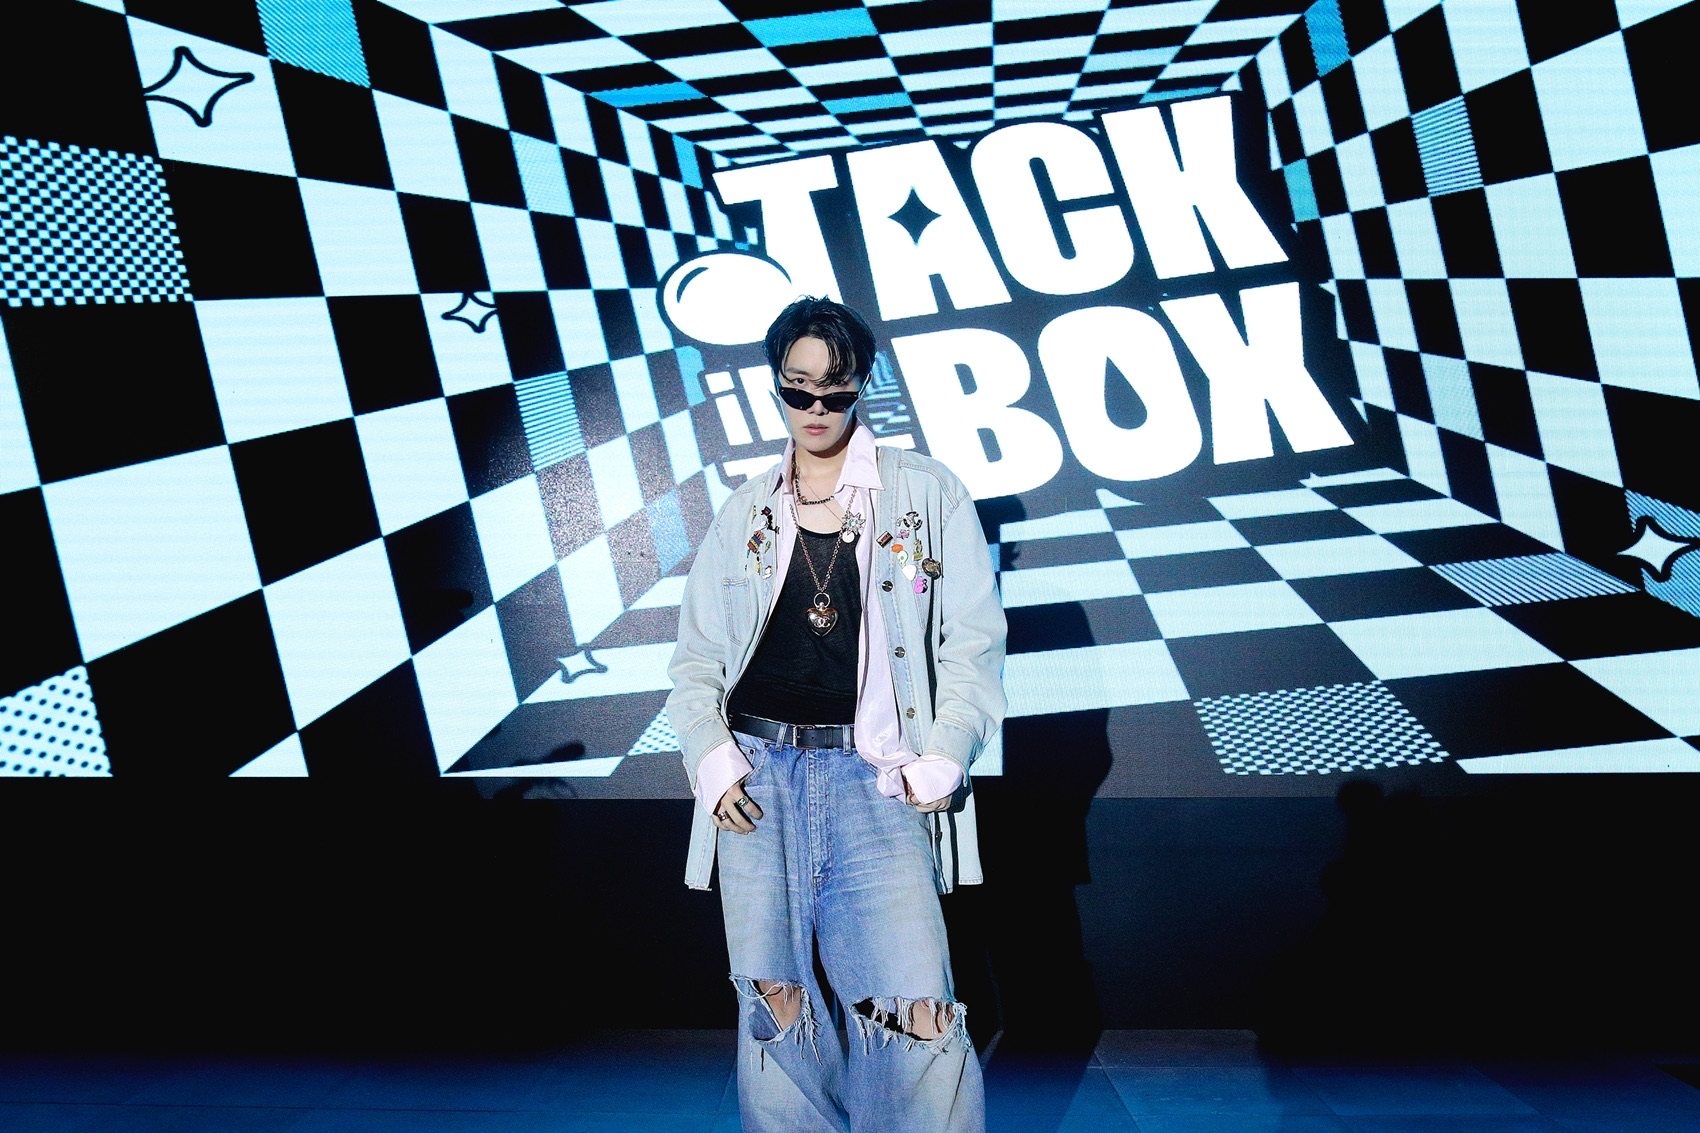 BTS’s J-hope “Jack in the Box’ promotional image. Photo: Handout